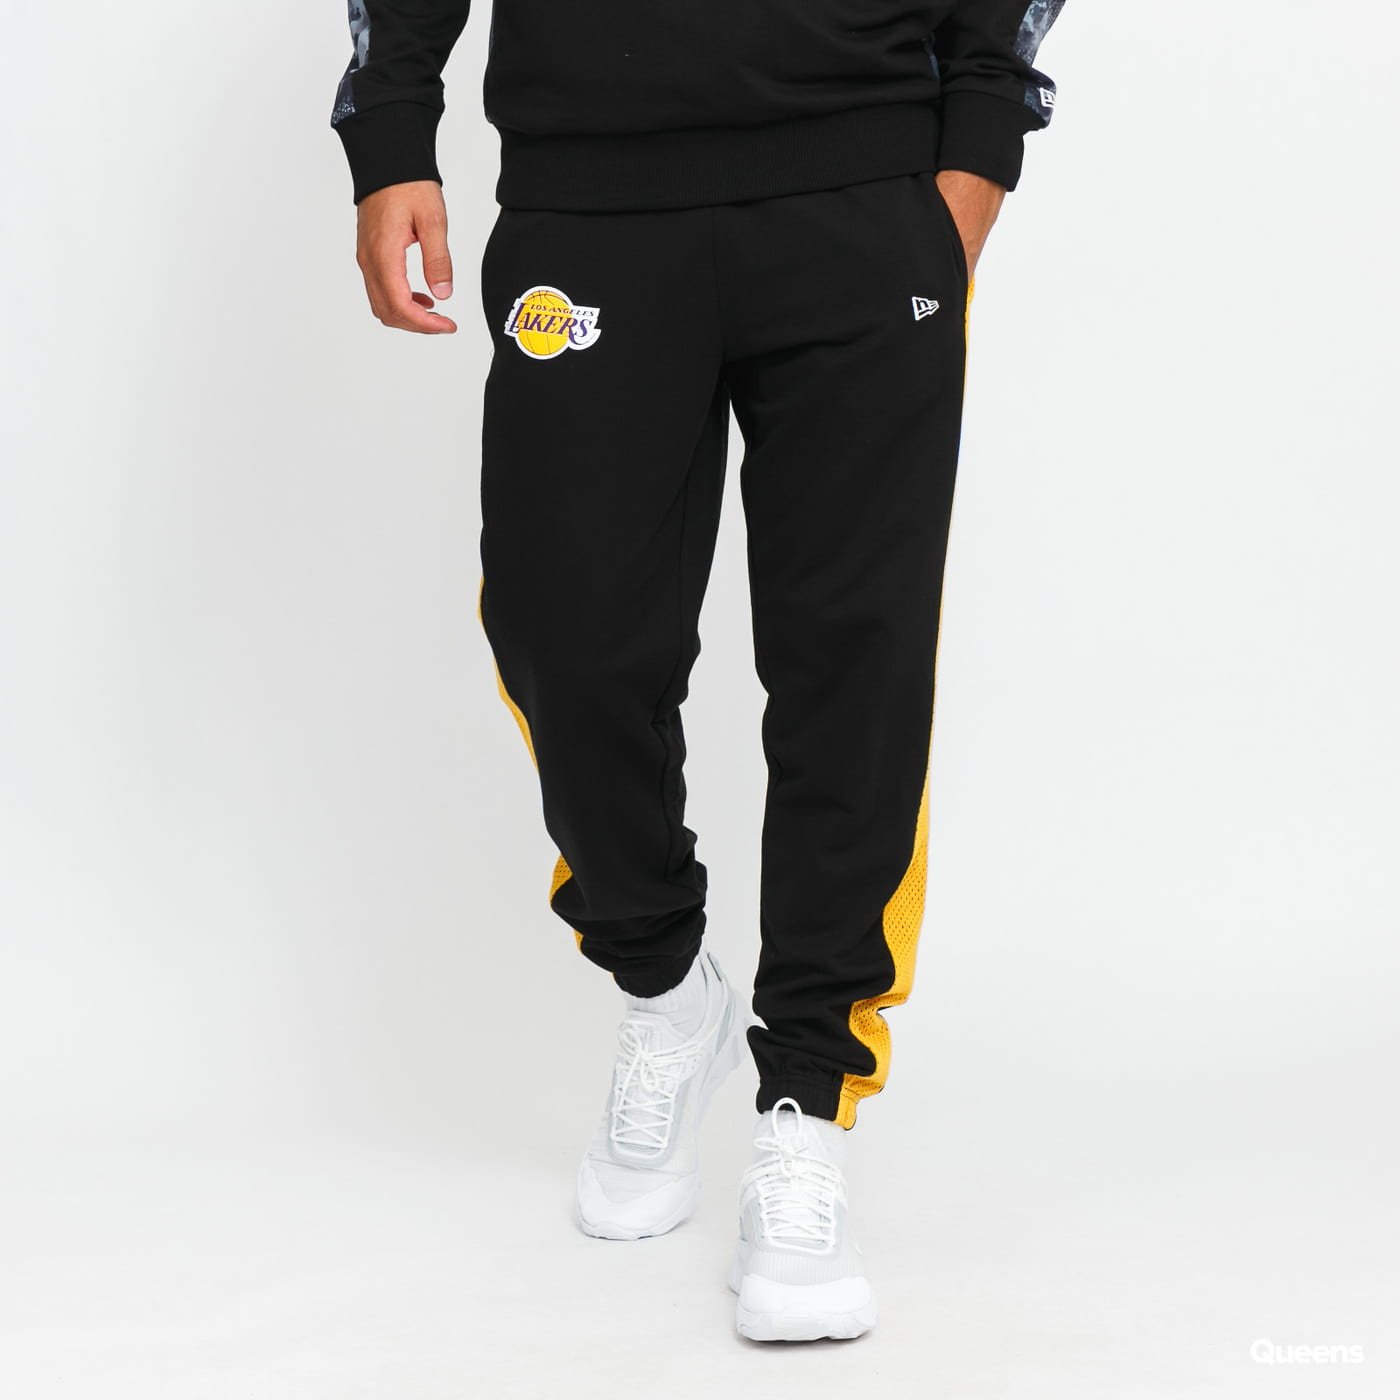 los angeles lakers joggers